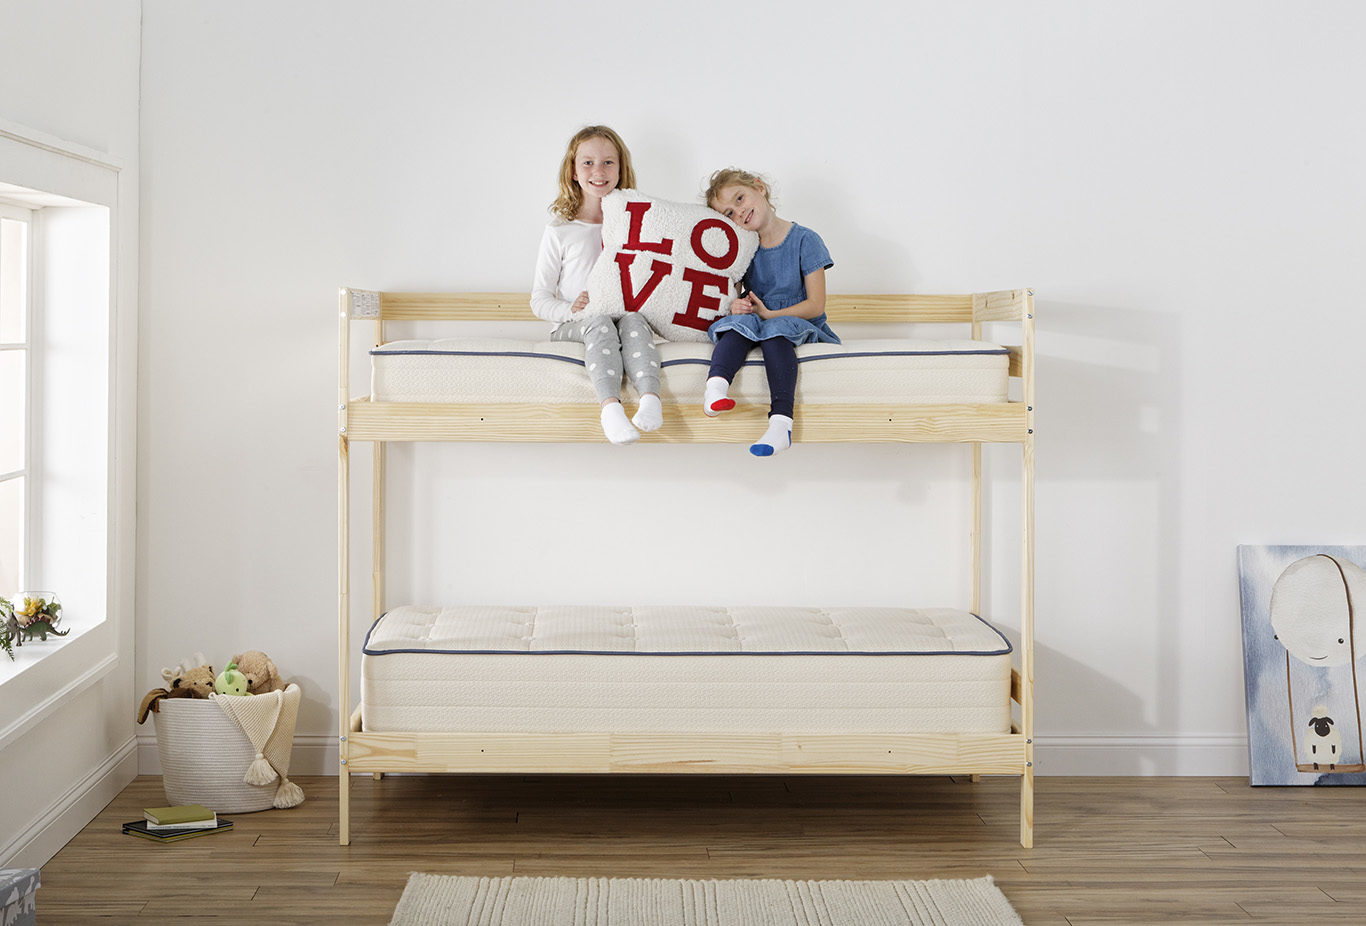 Kiwi Bunk Bed Mattresses, What Mattress Is Best For Bunk Beds